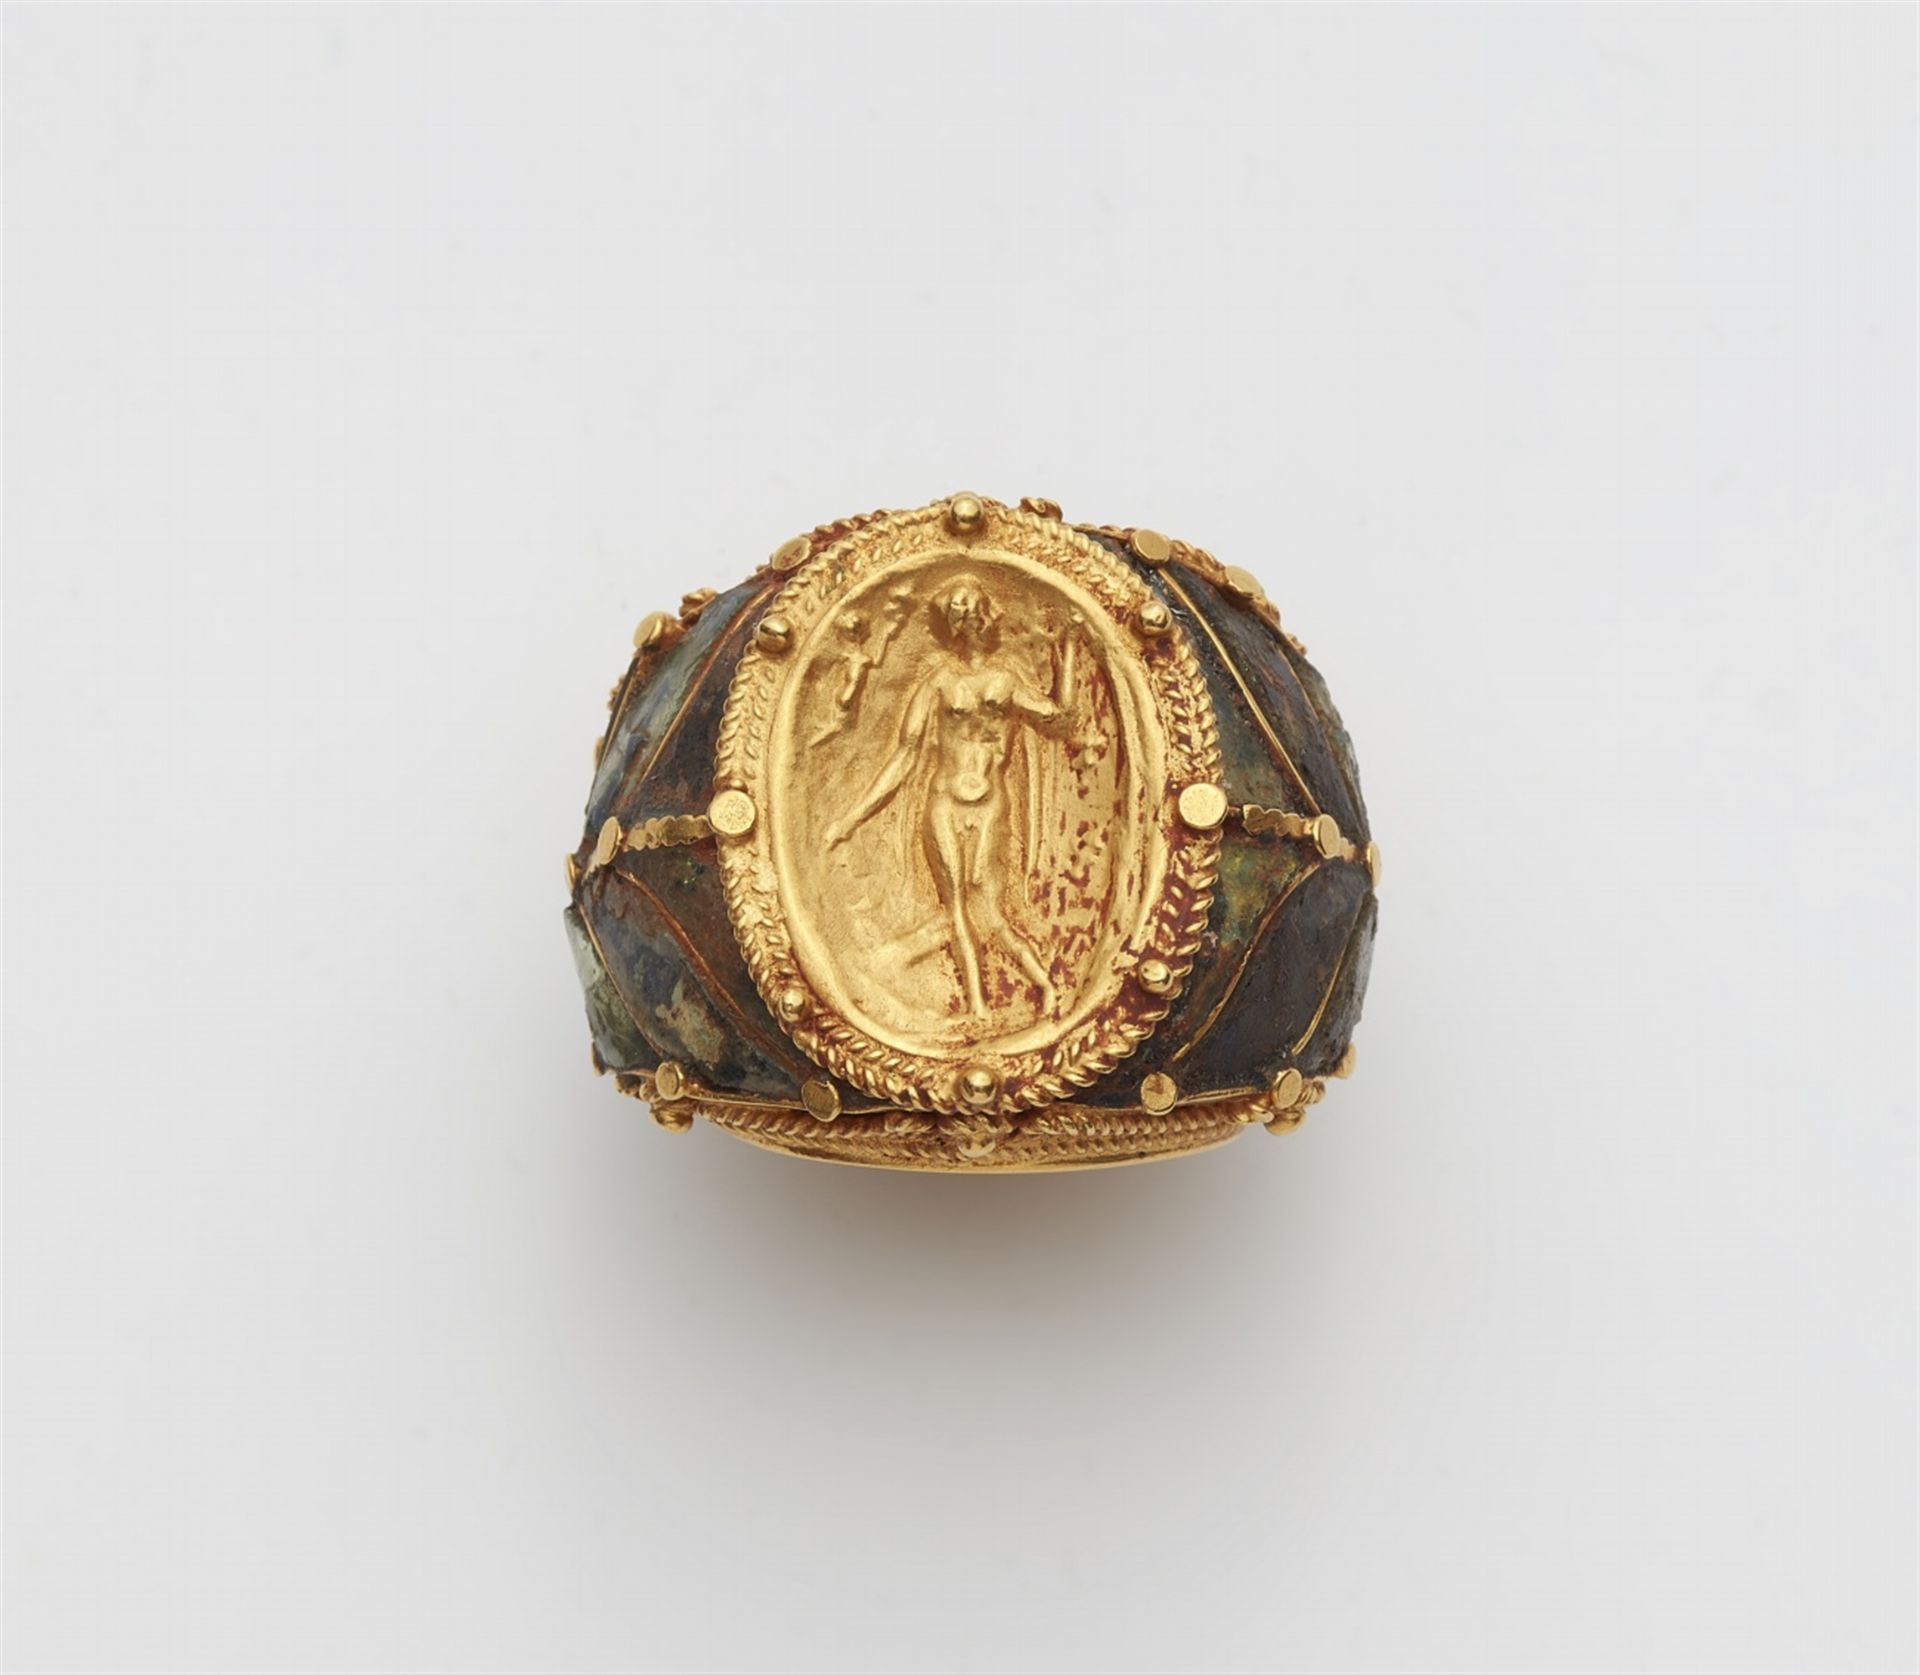 A 22k gold Historicist ring with Roman glass mosaic